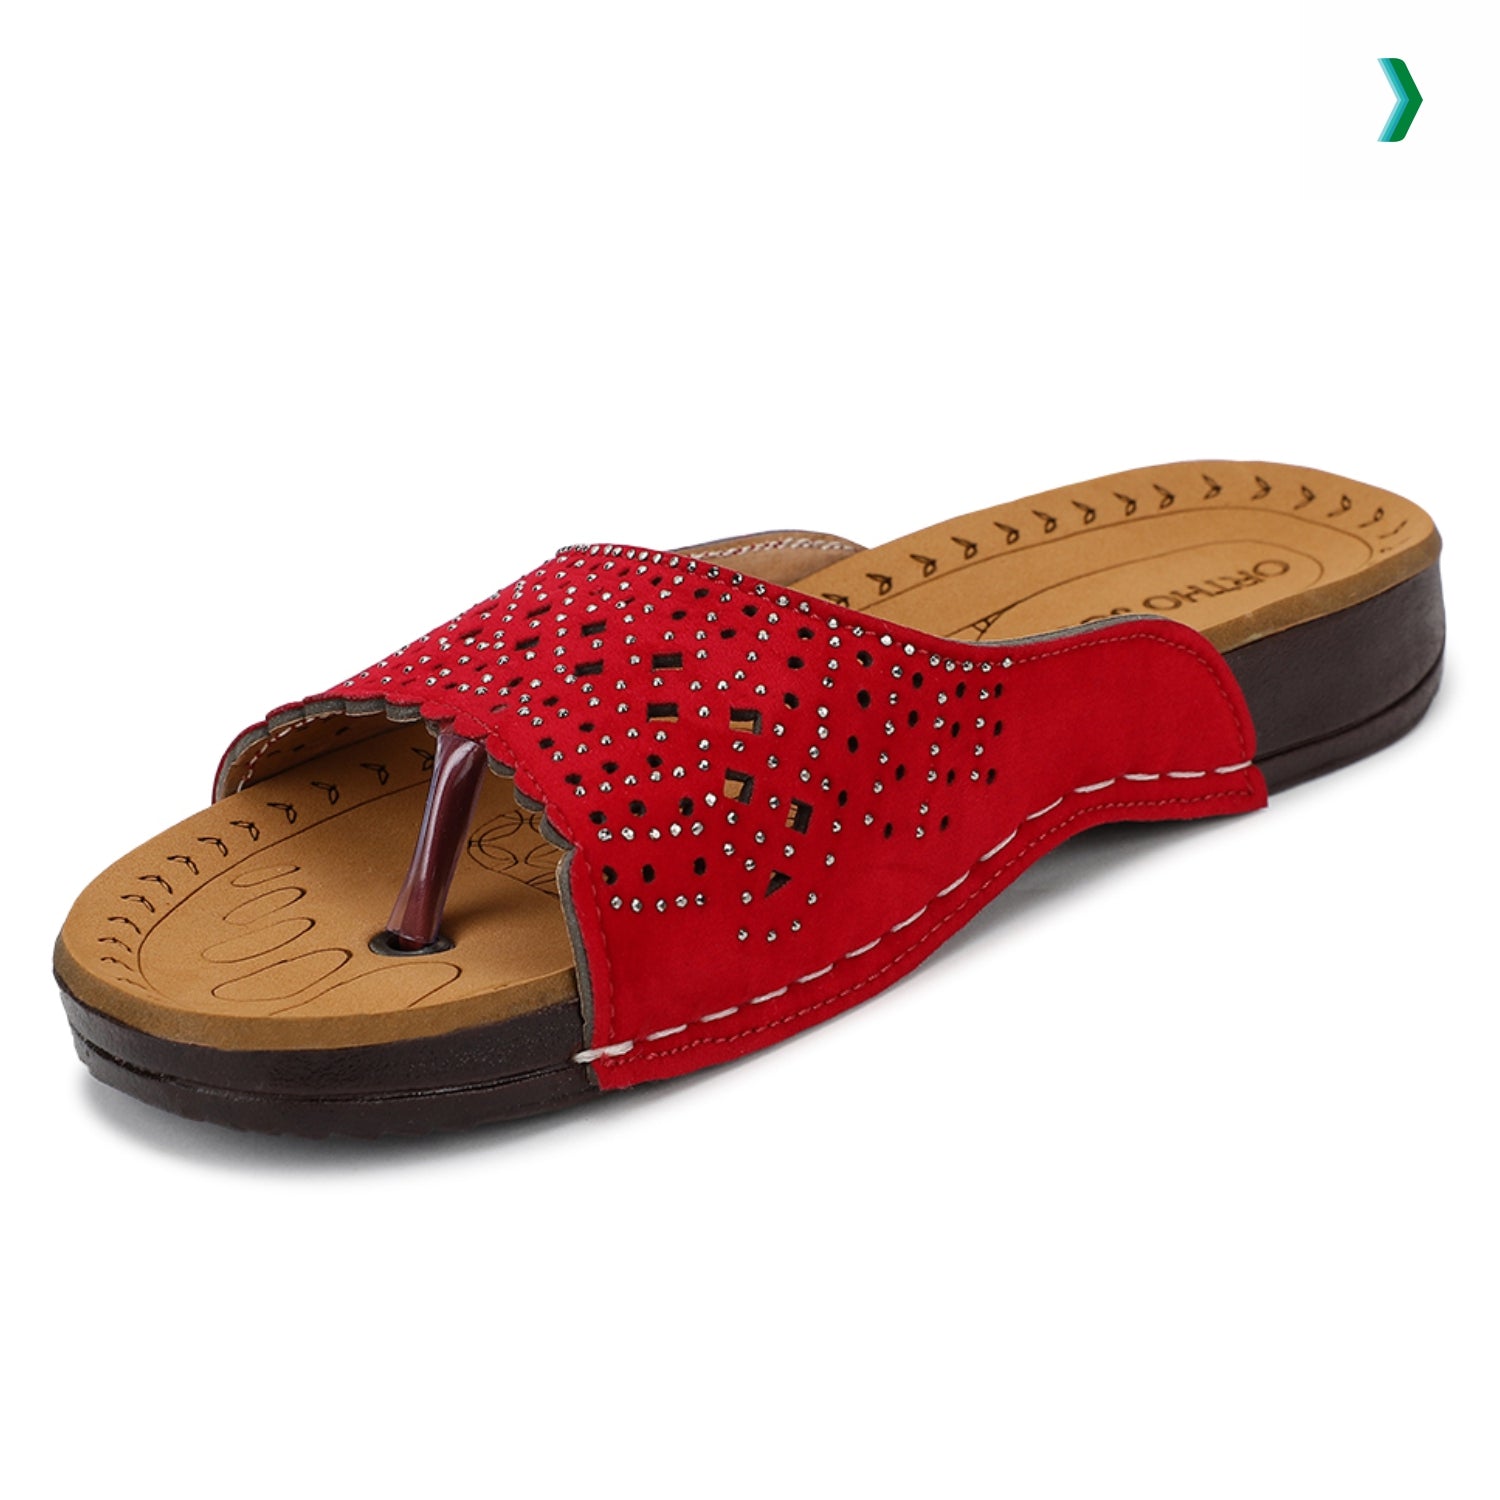 Women Slipper, Womens Slipper, best womens slipper, best women slipper, women fancy slipper, fancy slippers for women, doctor chappal for ladies, orthopedic slippers for women, ortho slippers, ortho slippers for ladies